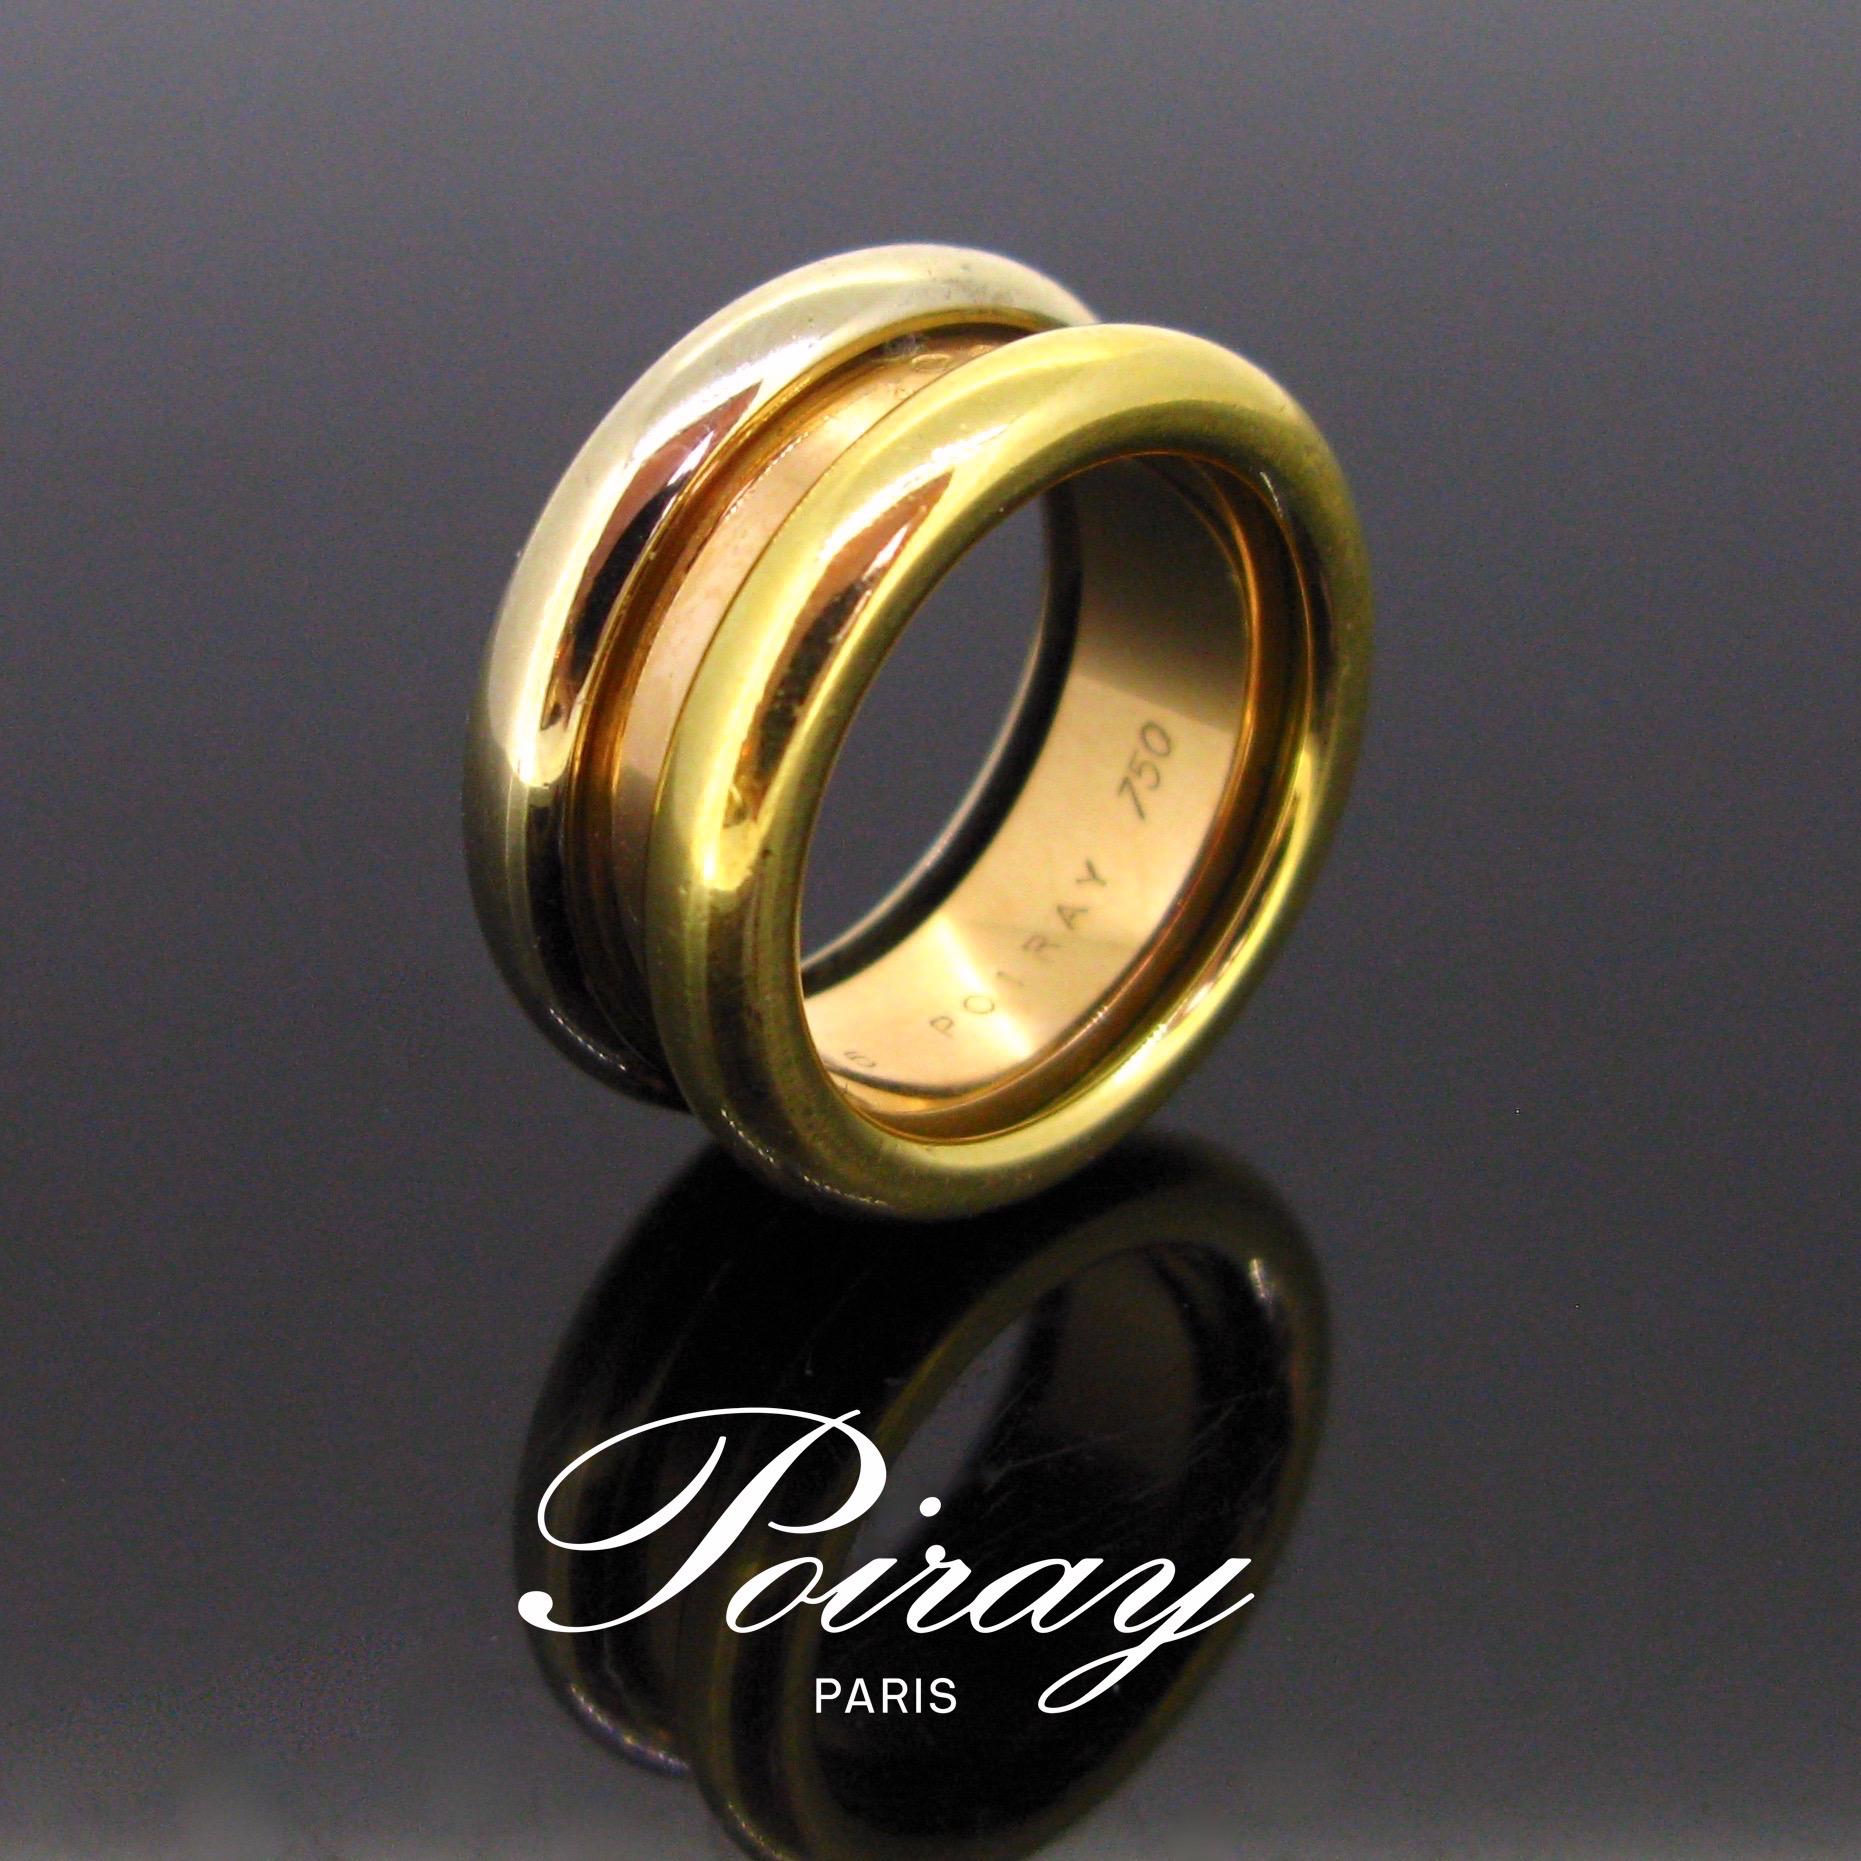 This ring is signed Poiray. It is made in 18kt gold with three colours : Yellow, Rose and White. The gold is smooth and shiny. It is in very good condition. It is signed and numbered inside the ring band. We can see also the maker’s mark and the